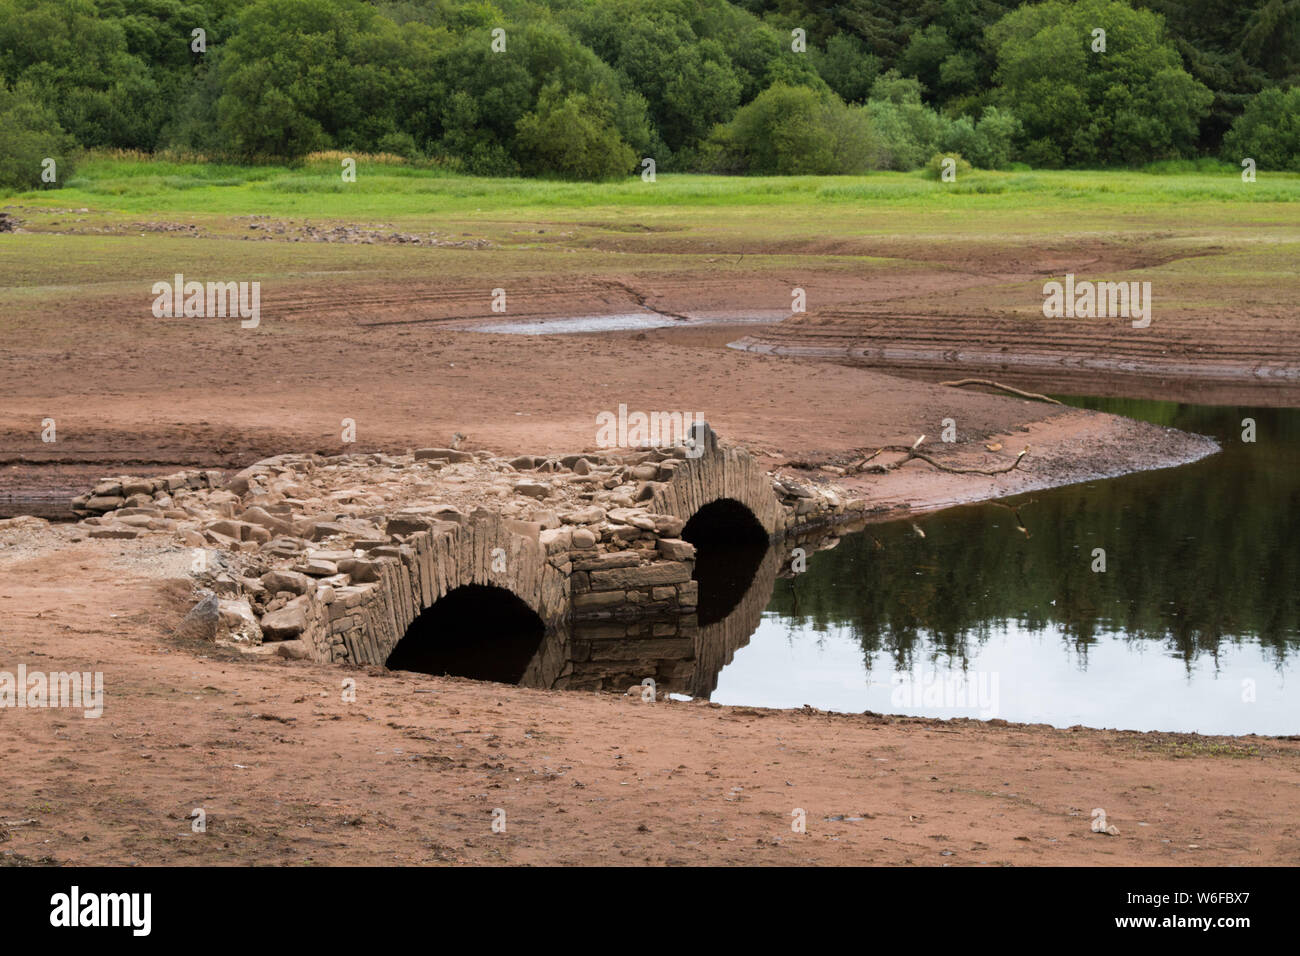 Llwyn On Reservoir, South Wales, UK. 1st Aug, 2019. UK weather: With the continued heatwave over recent weeks, the reservoir has depleted and uncovered an old bridge normally underwater, Pont Yr Daf. It was in use before the reservoir's construction. Credit: Andrew Bartlett/Alamy Live News Stock Photo